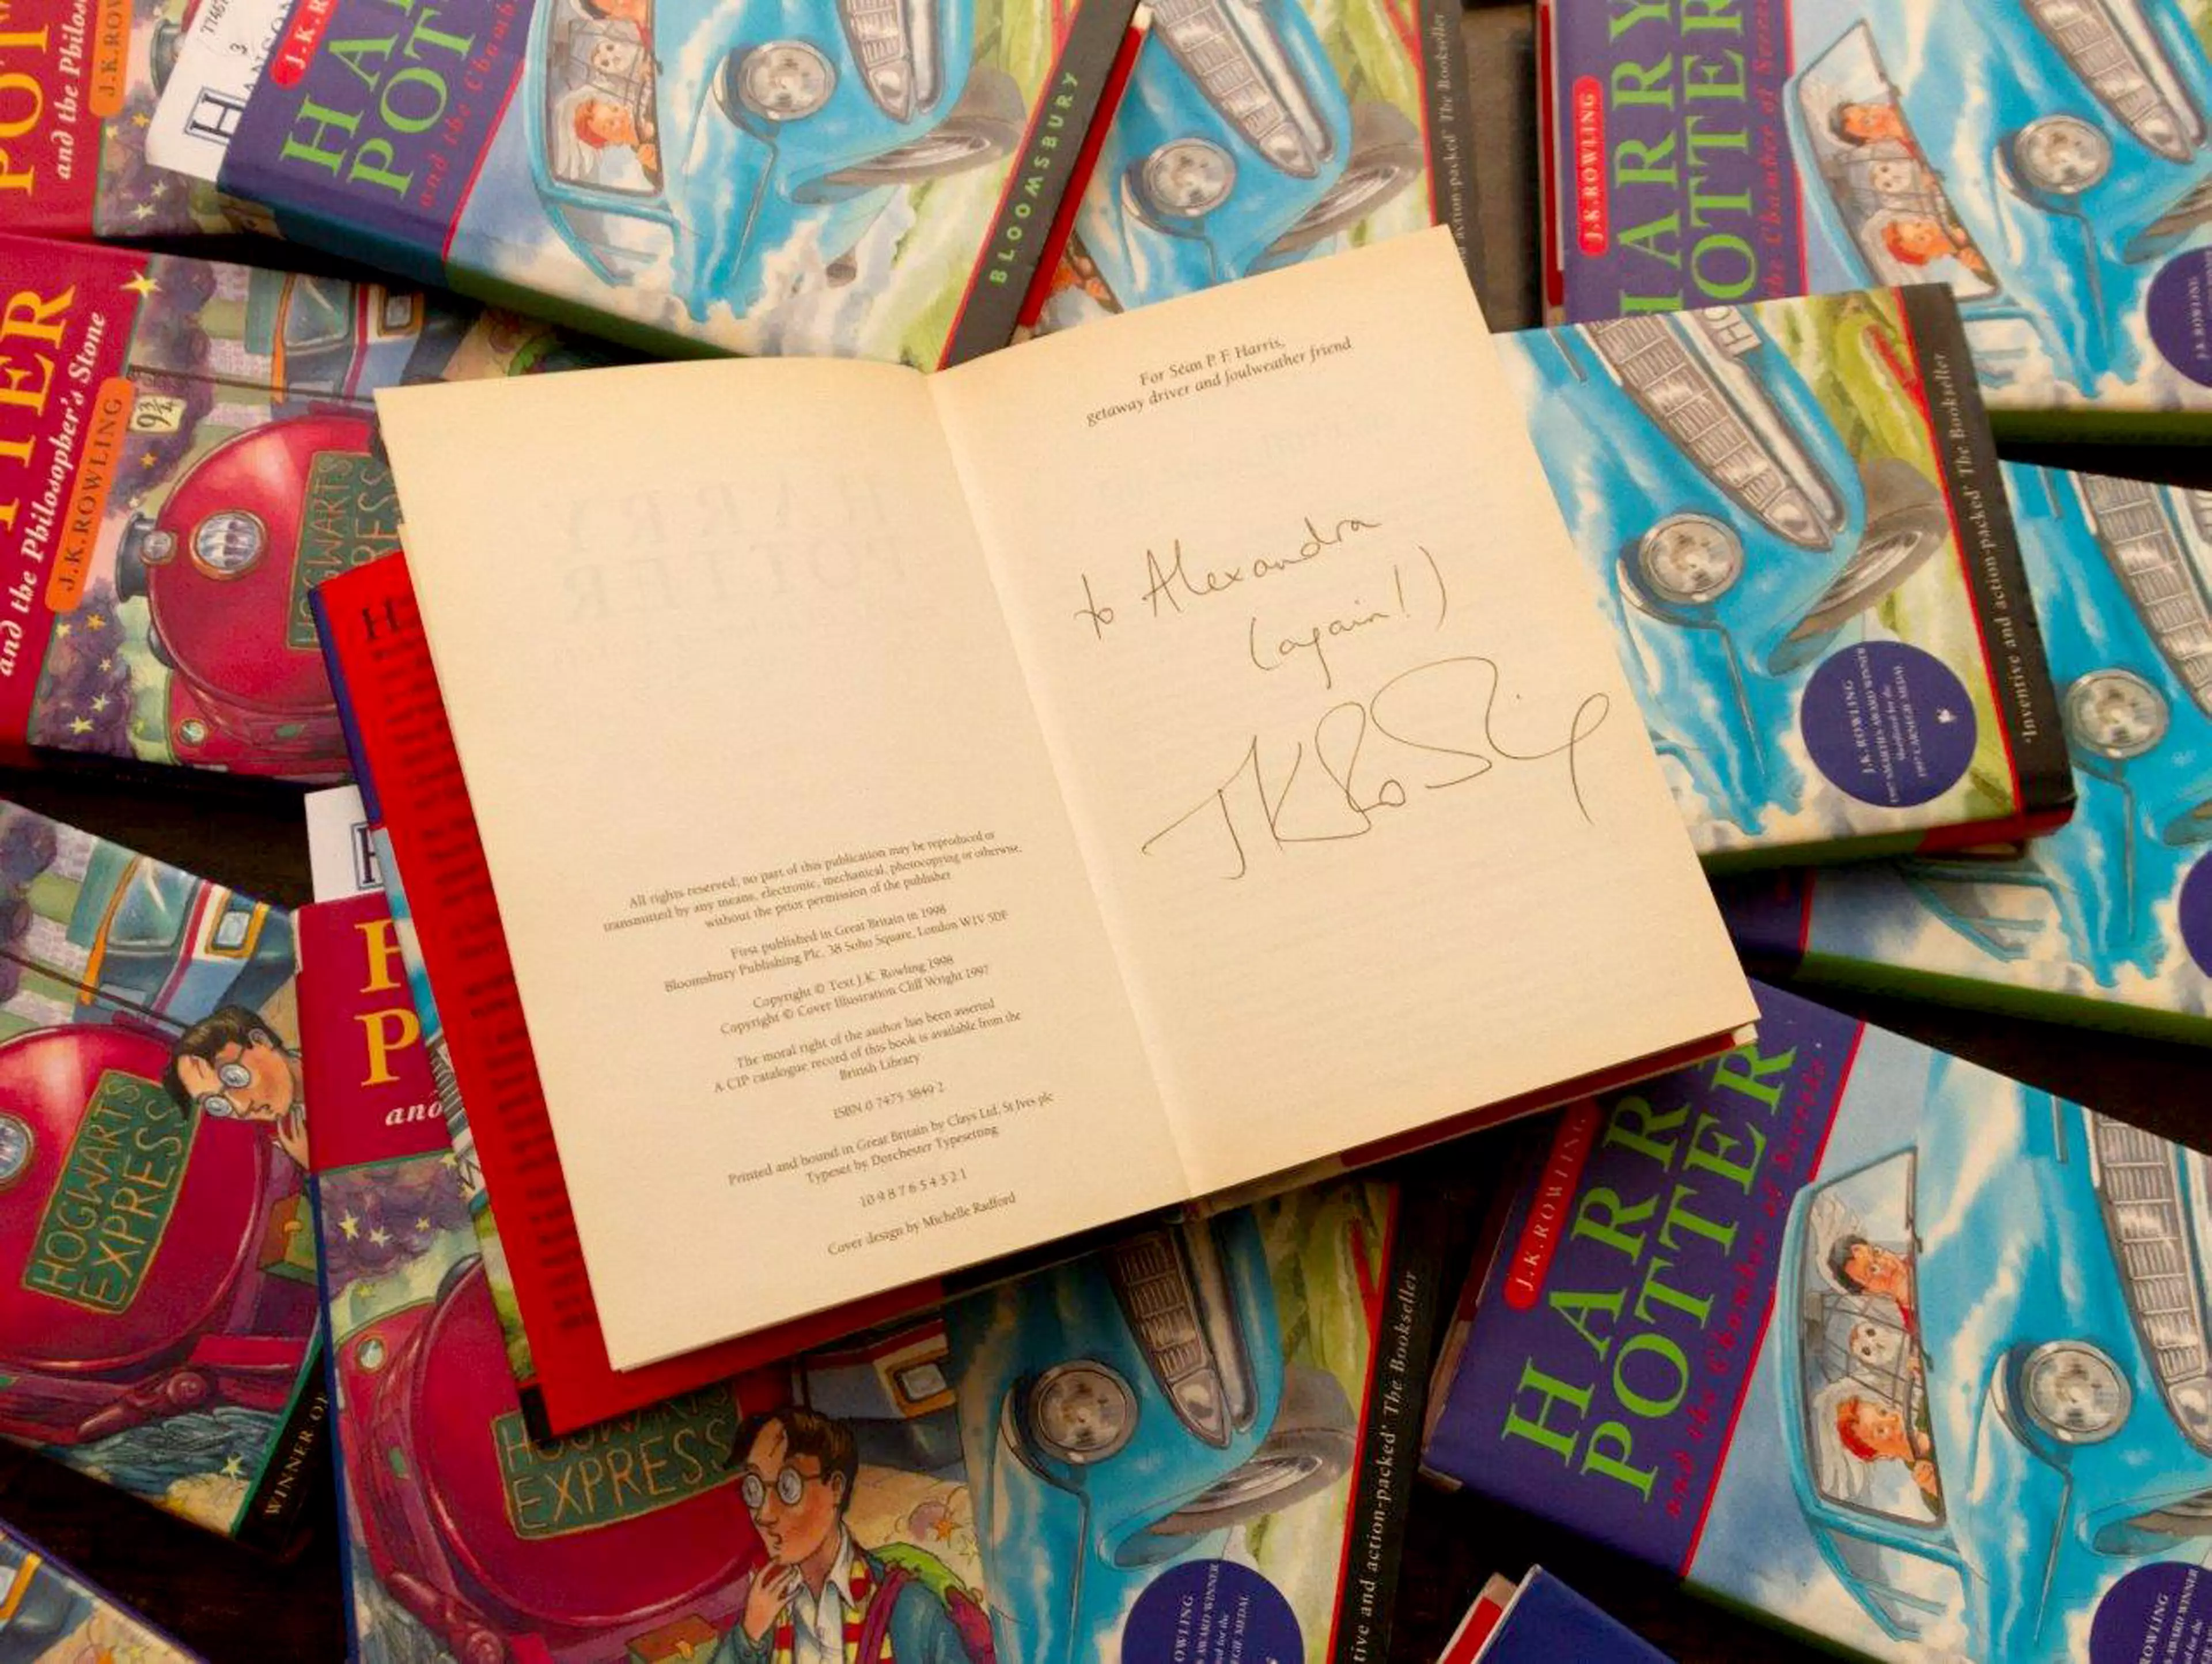 The Harry Potter book was signed by J.K. Rowling (